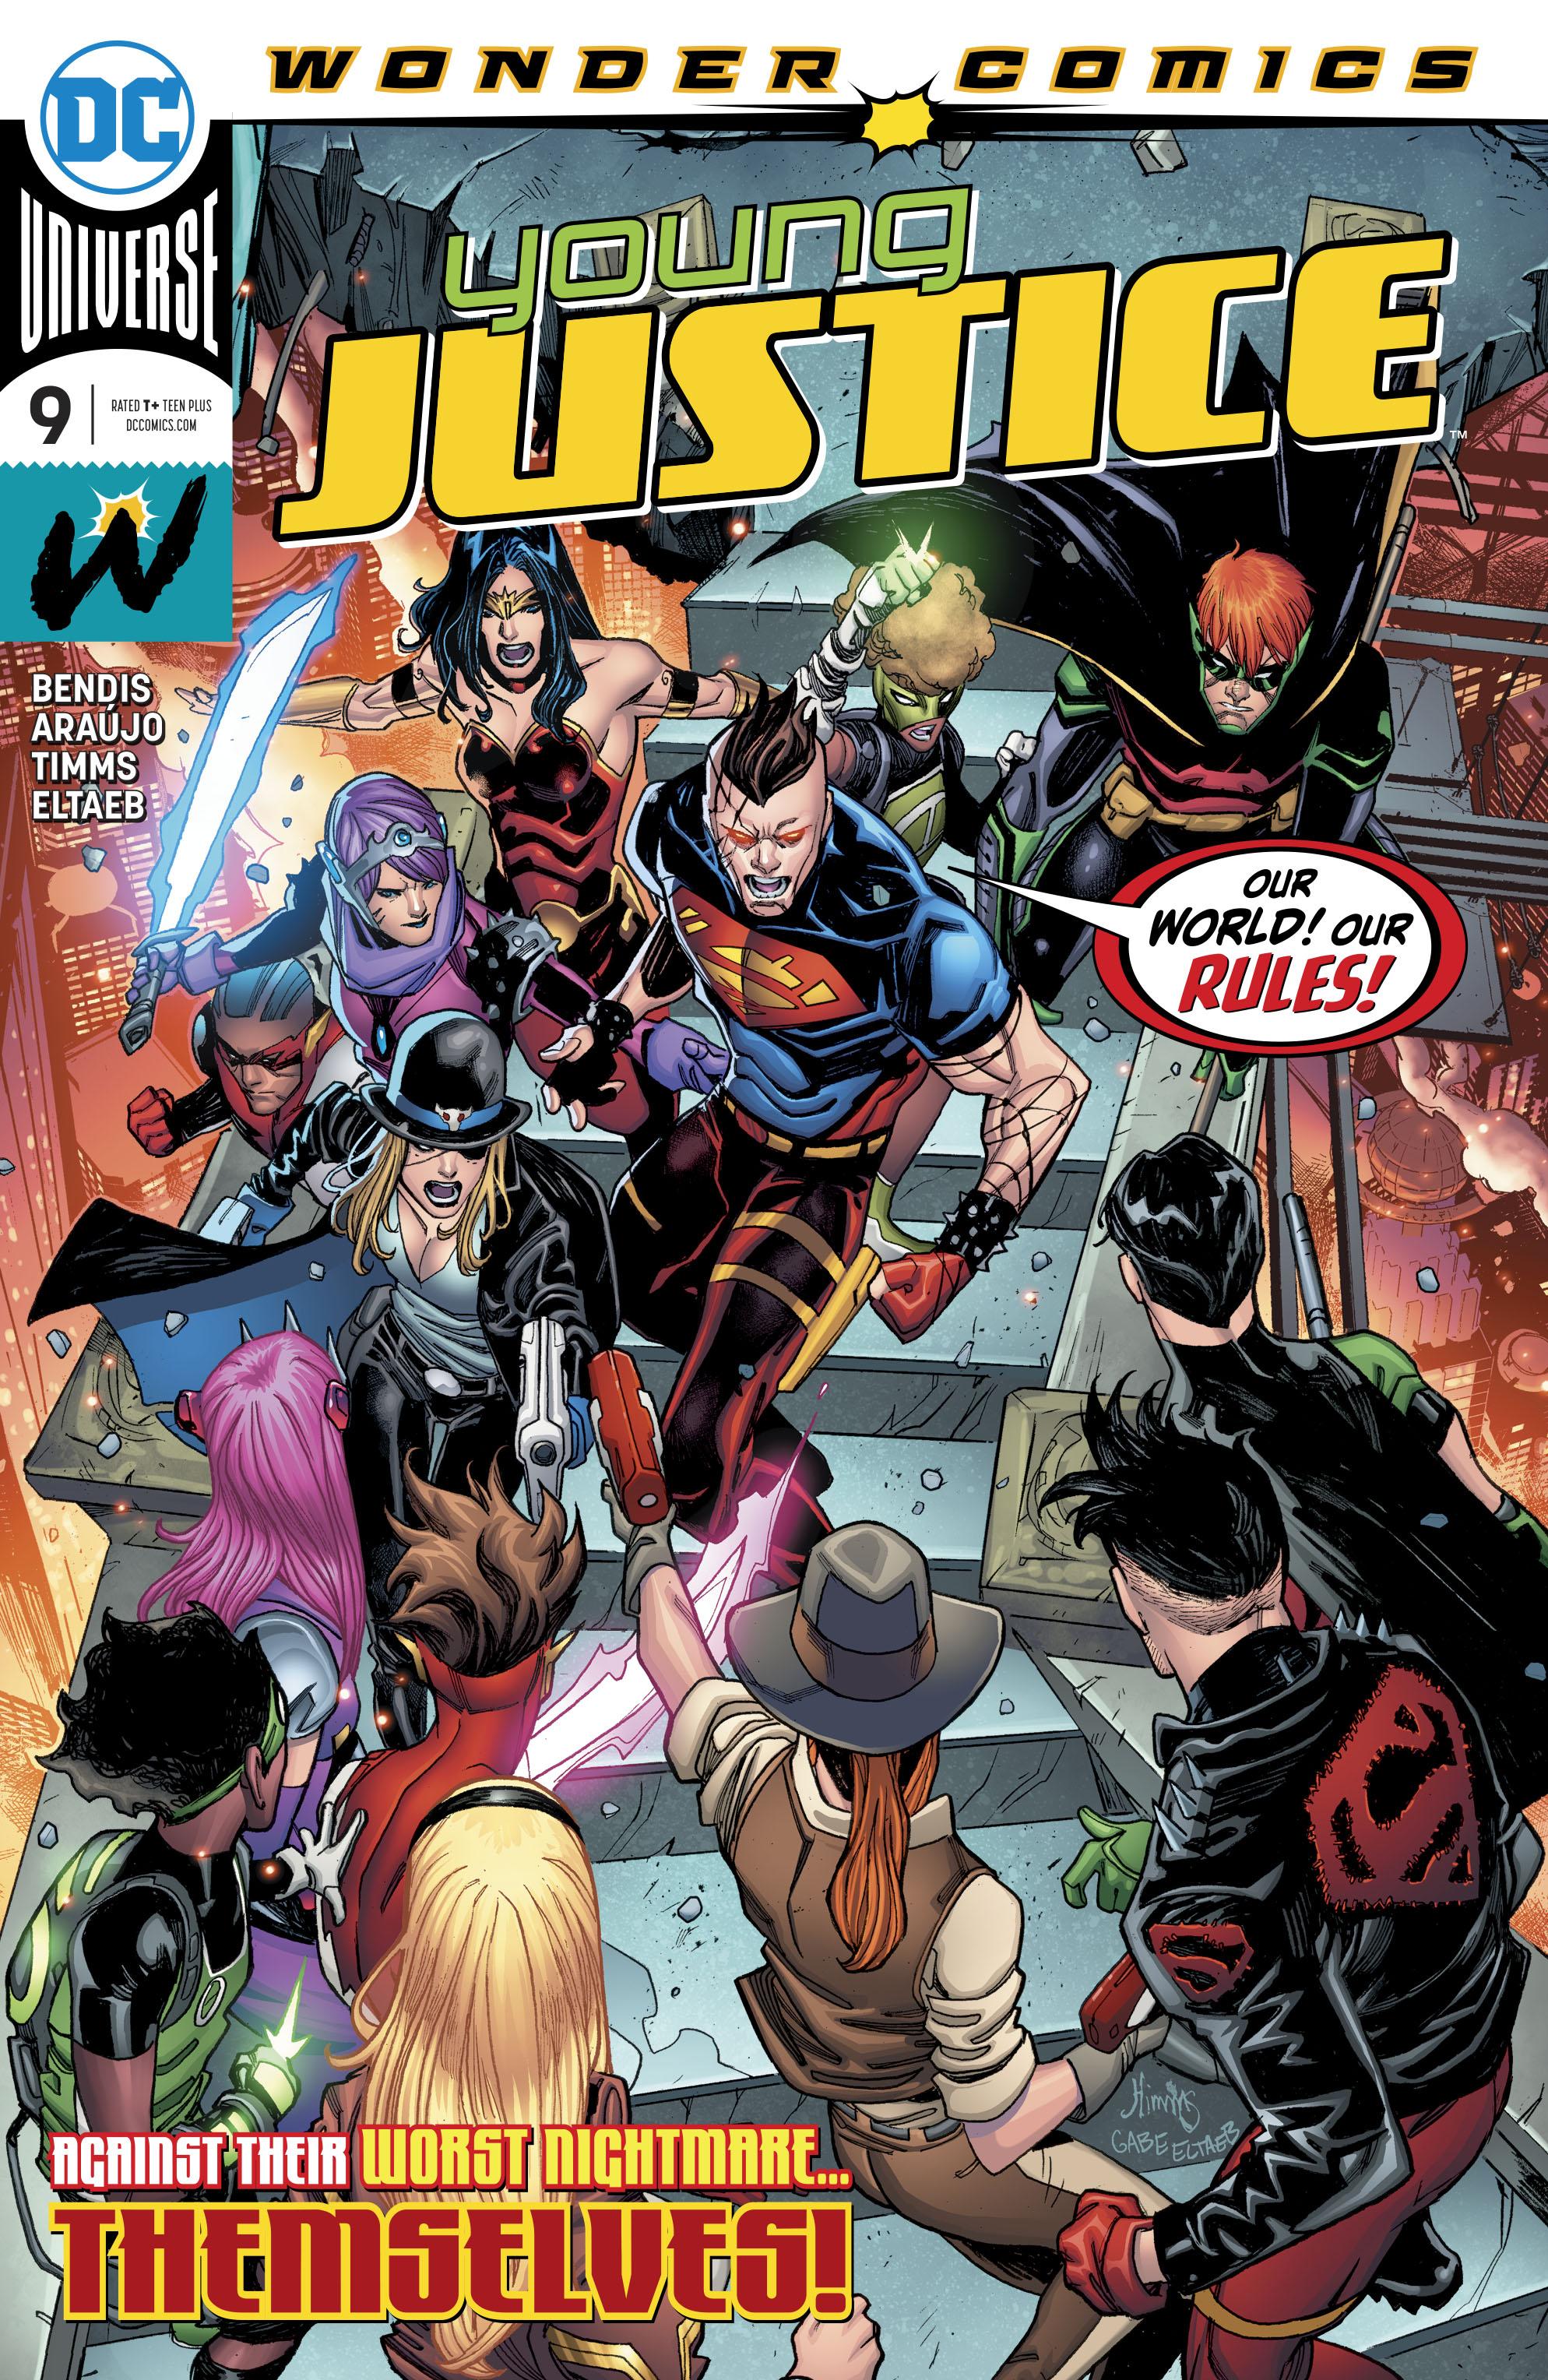 Young Justice Vol. 3 #9